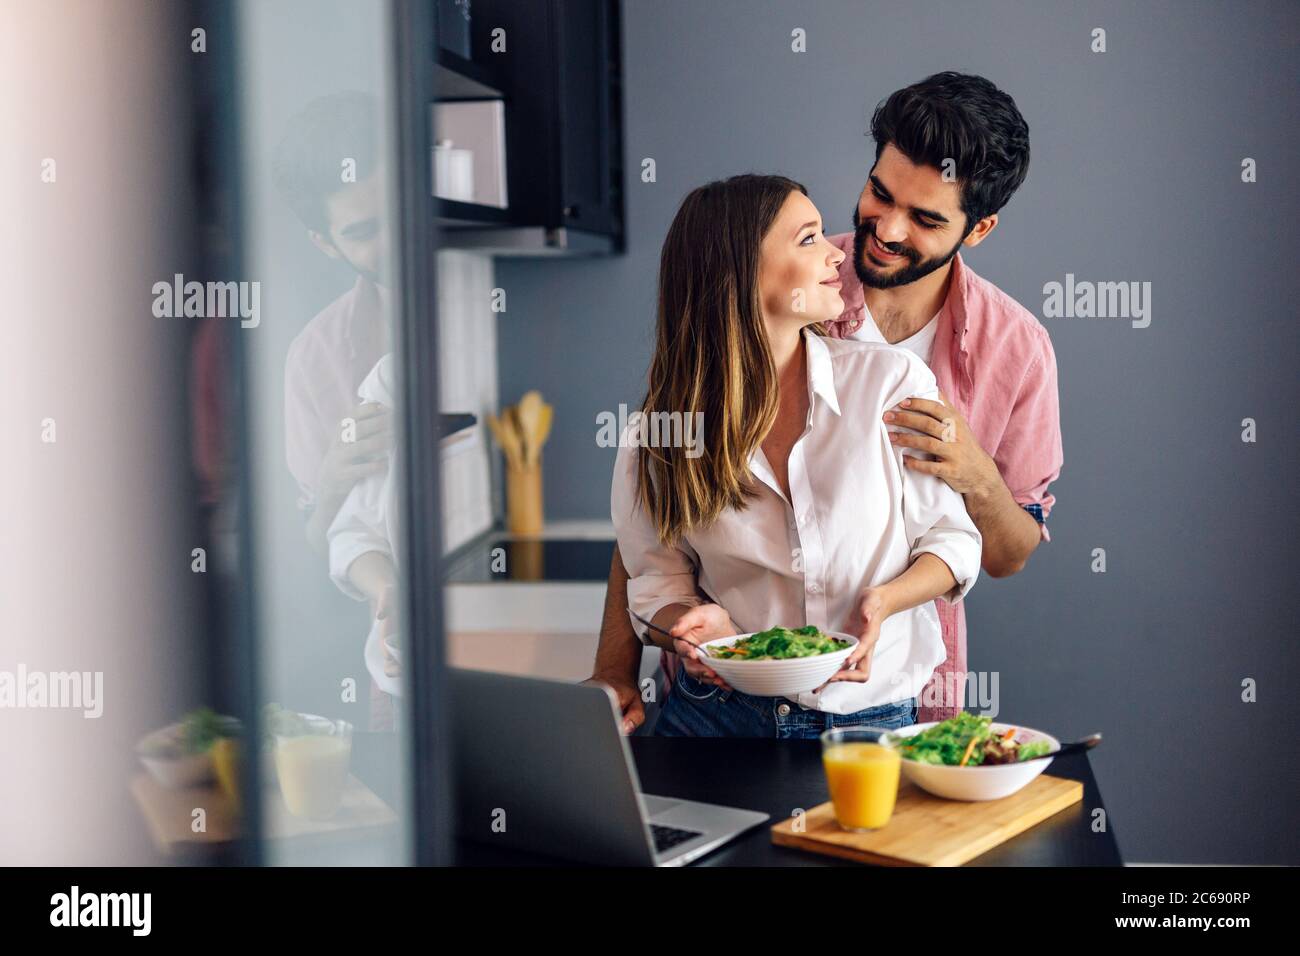 Couple enjoying breakfast time together at home. Stock Photo